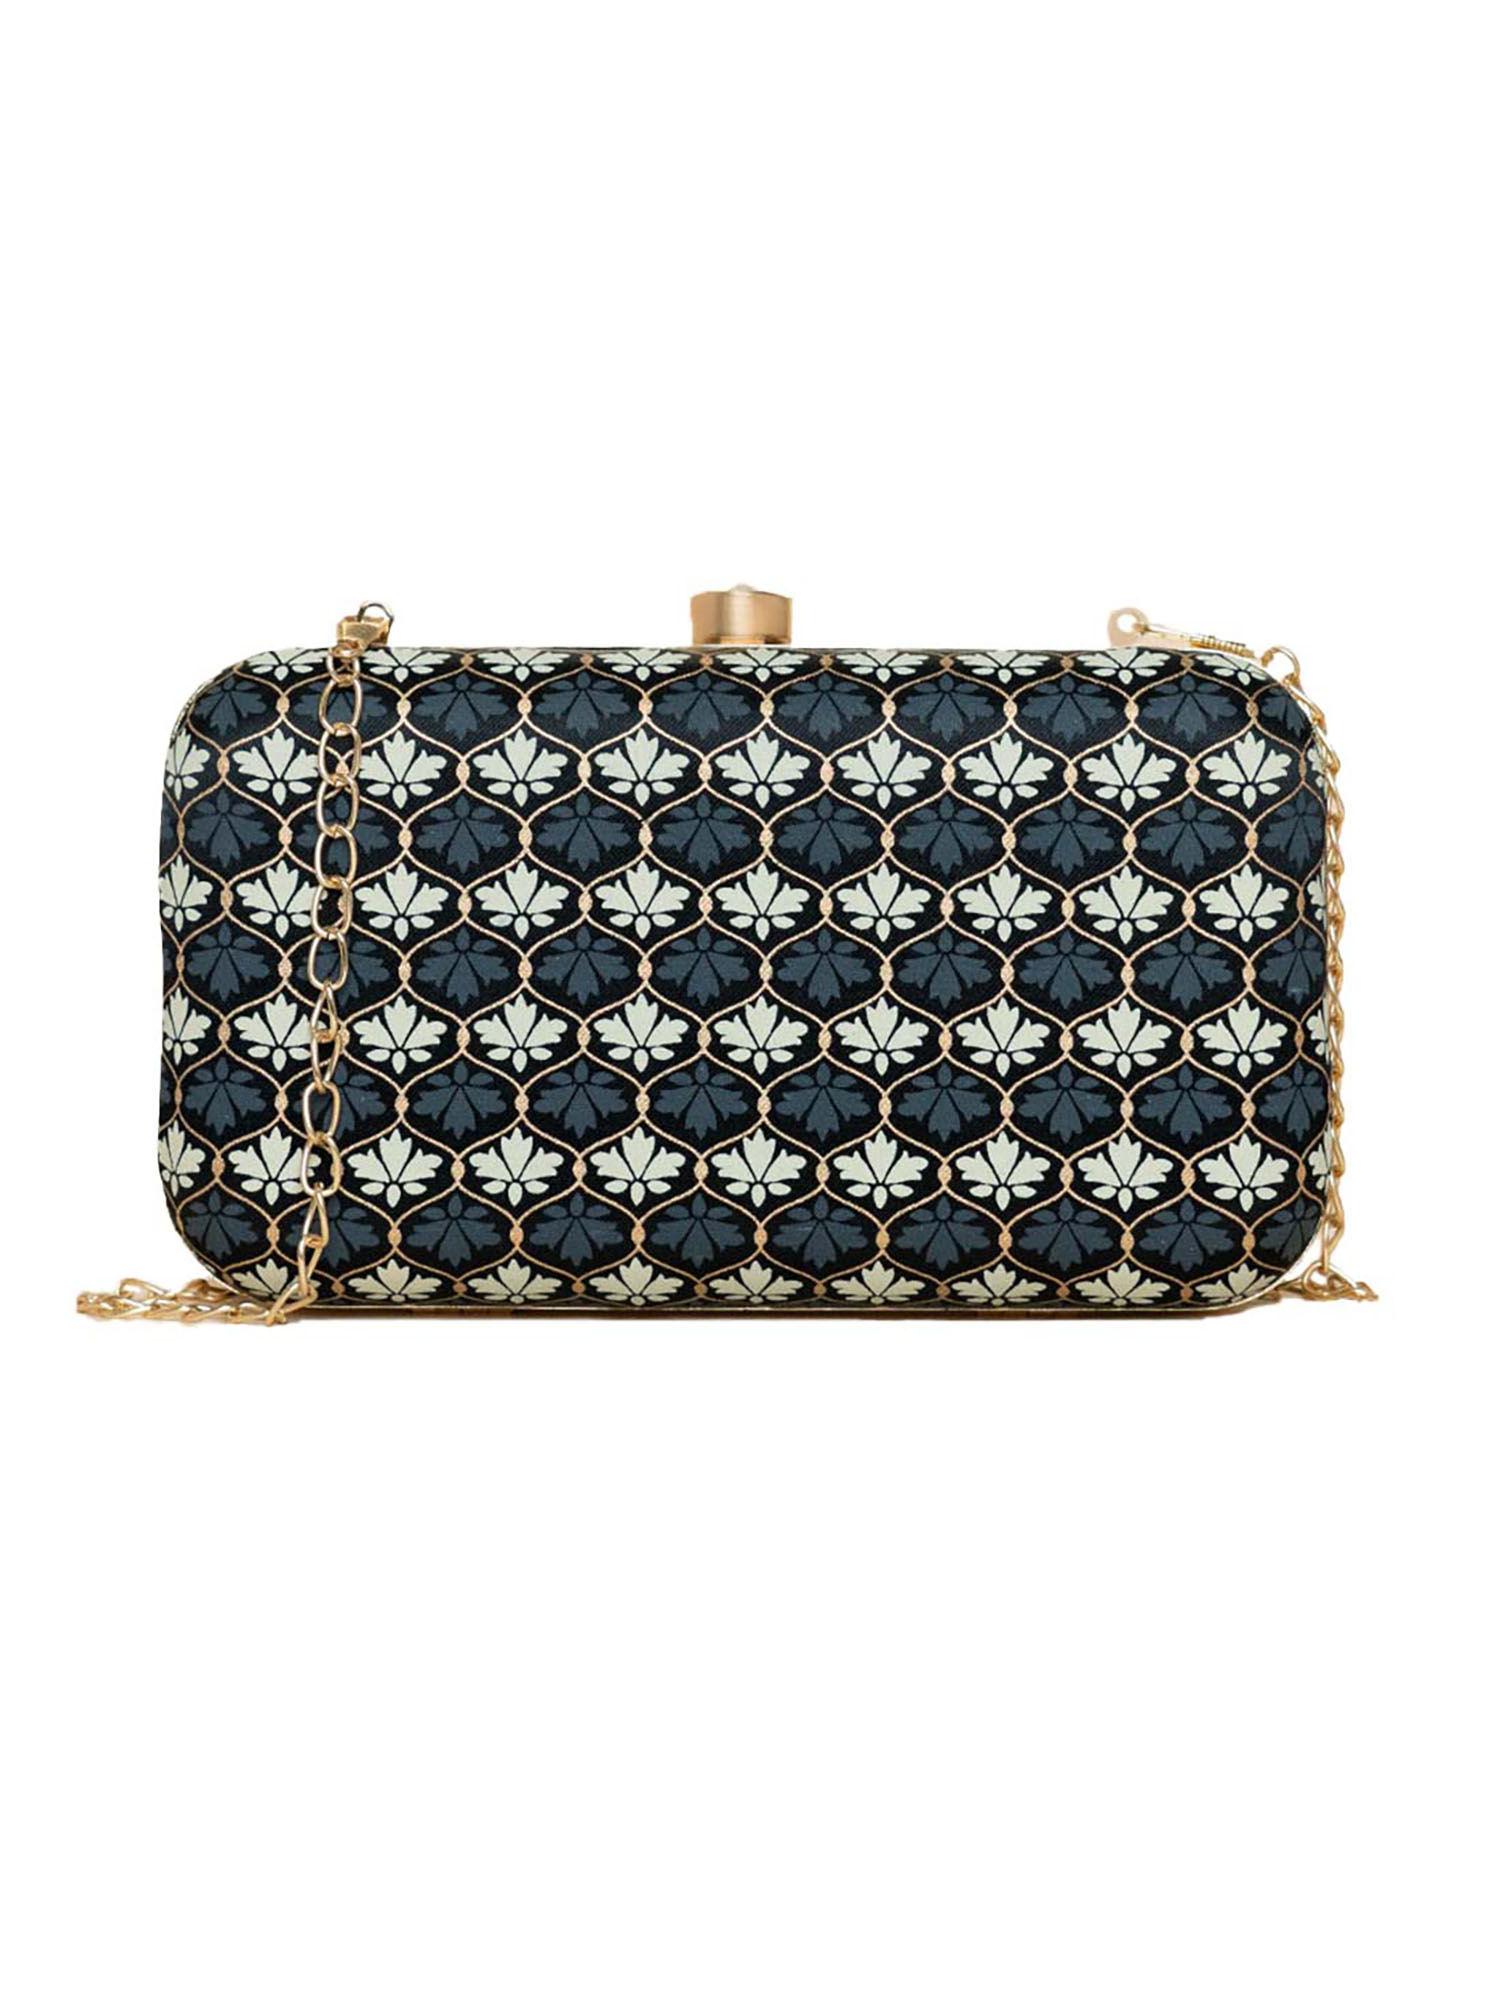 white & grey color printed fancy clutch for women